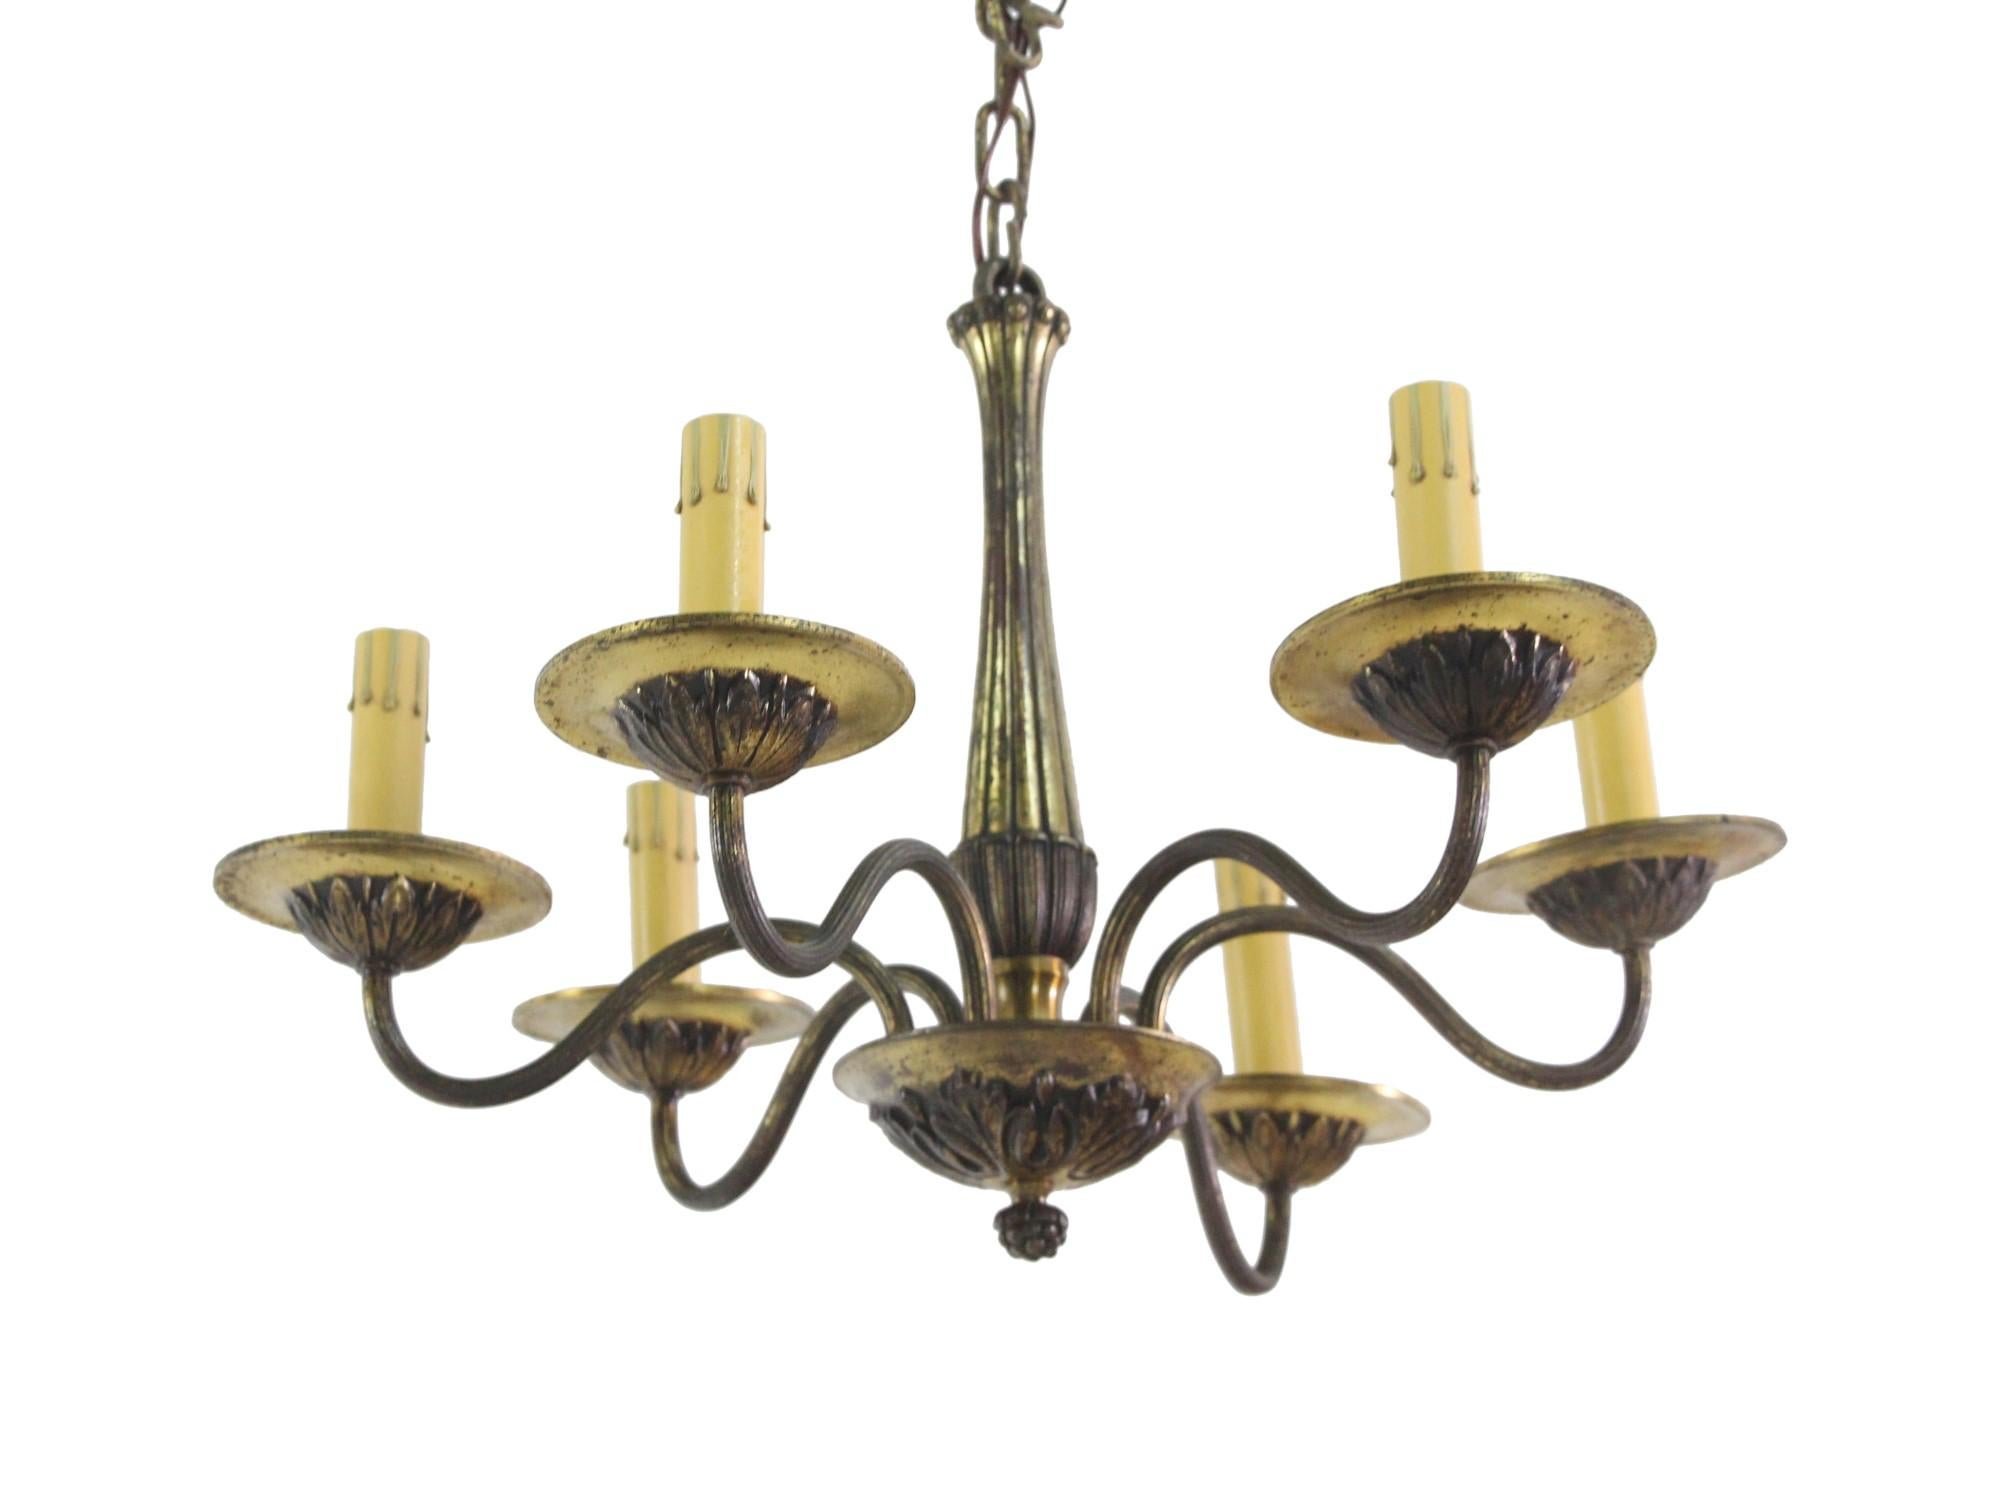 Petite French 6 Light Brass Chandelier Elegant Design Early 1900's In Good Condition For Sale In New York, NY